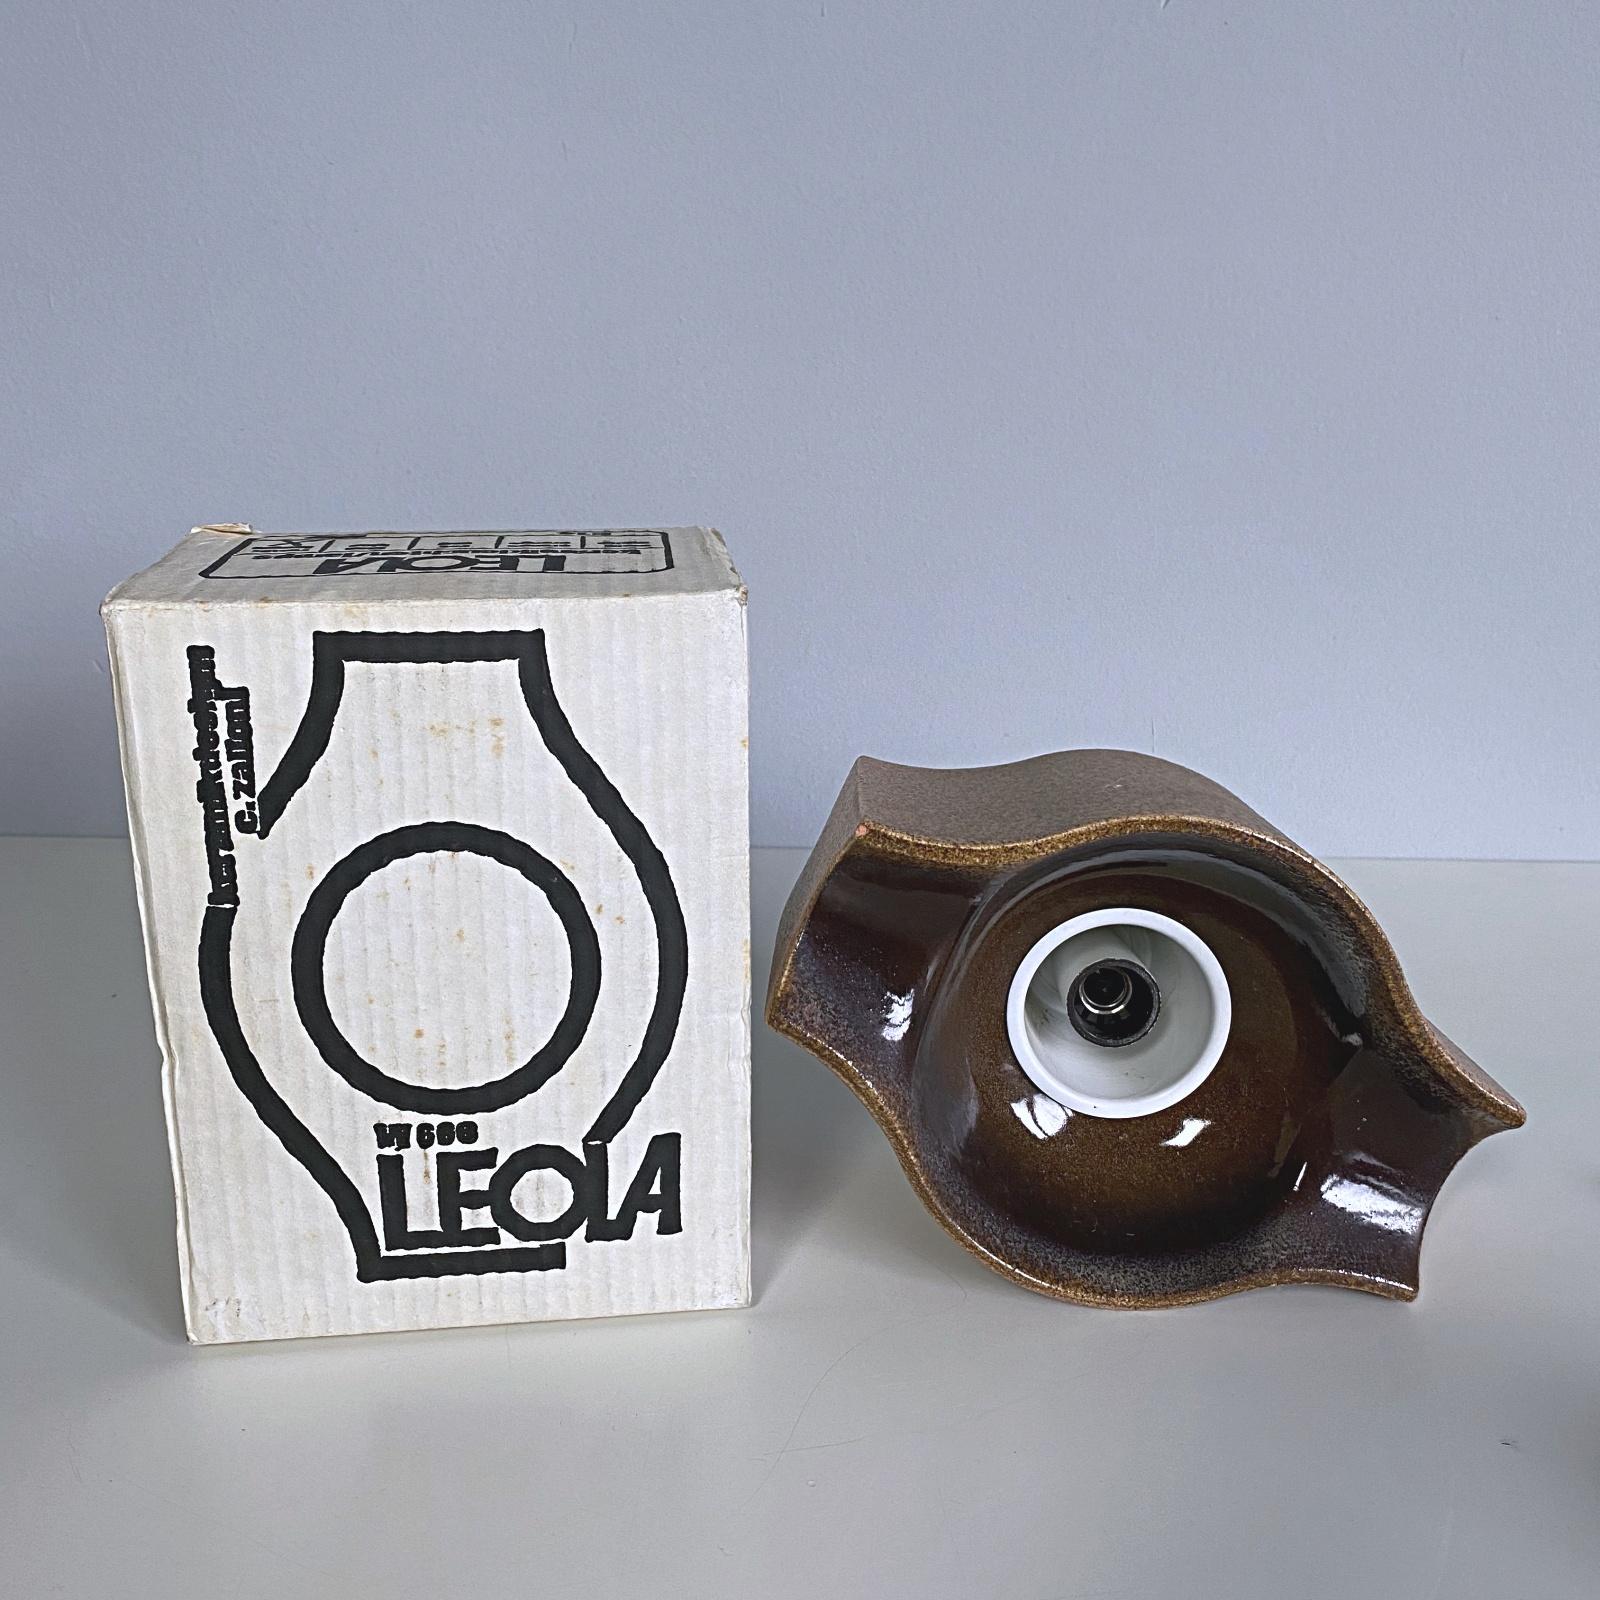 17 Modernist Ceramic Wall Lamps by Zalloni for Leola, 1960s, Germany For Sale 6